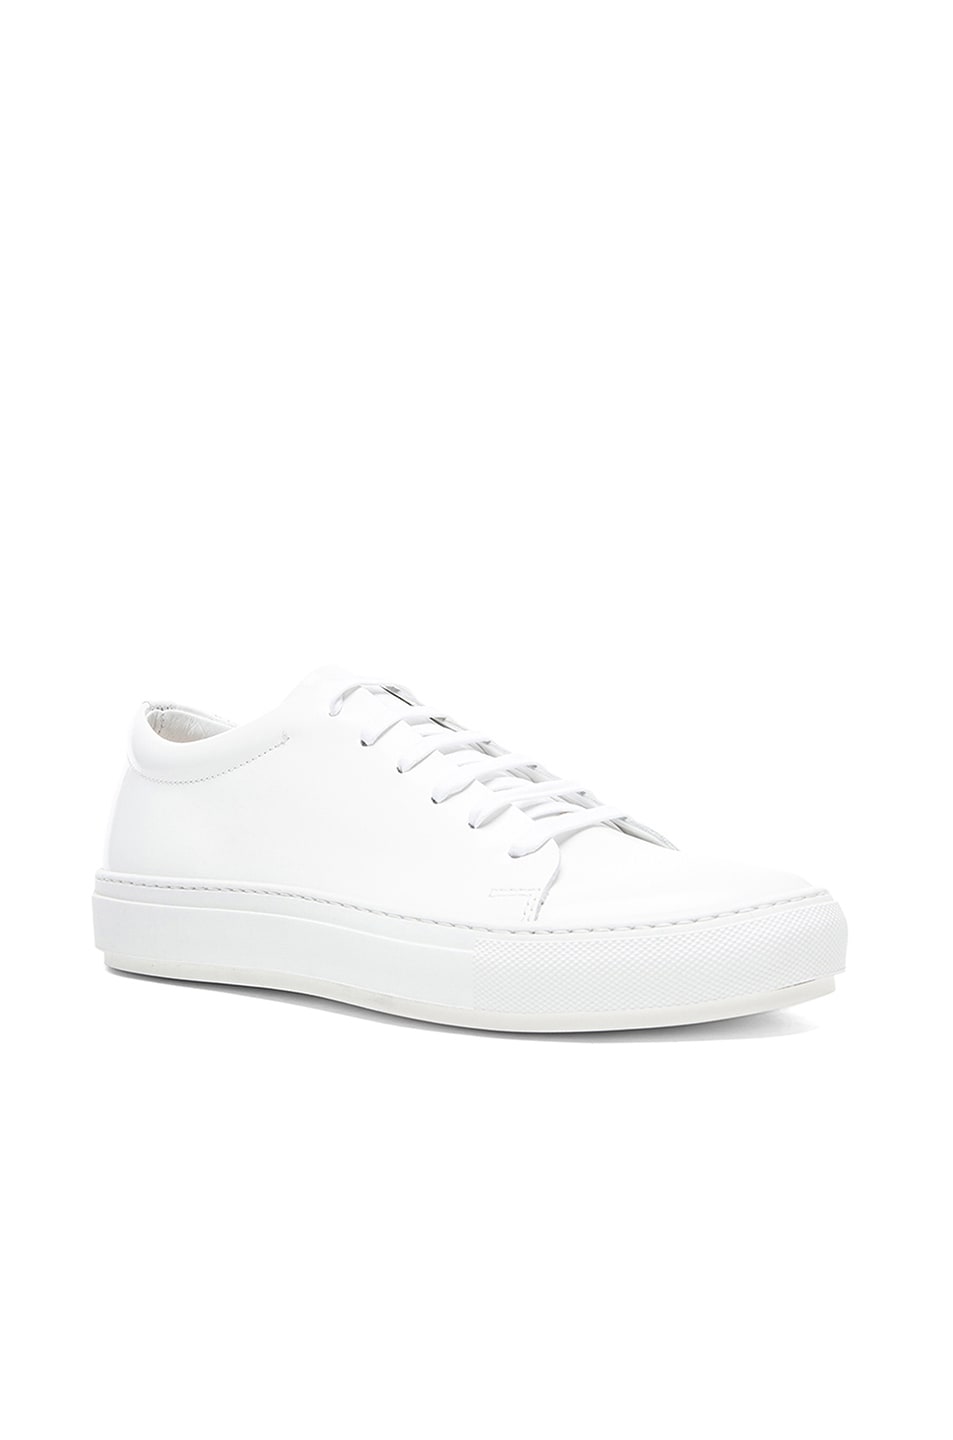 Image 1 of Acne Studios Adrian Patent Leather Sneakers in White